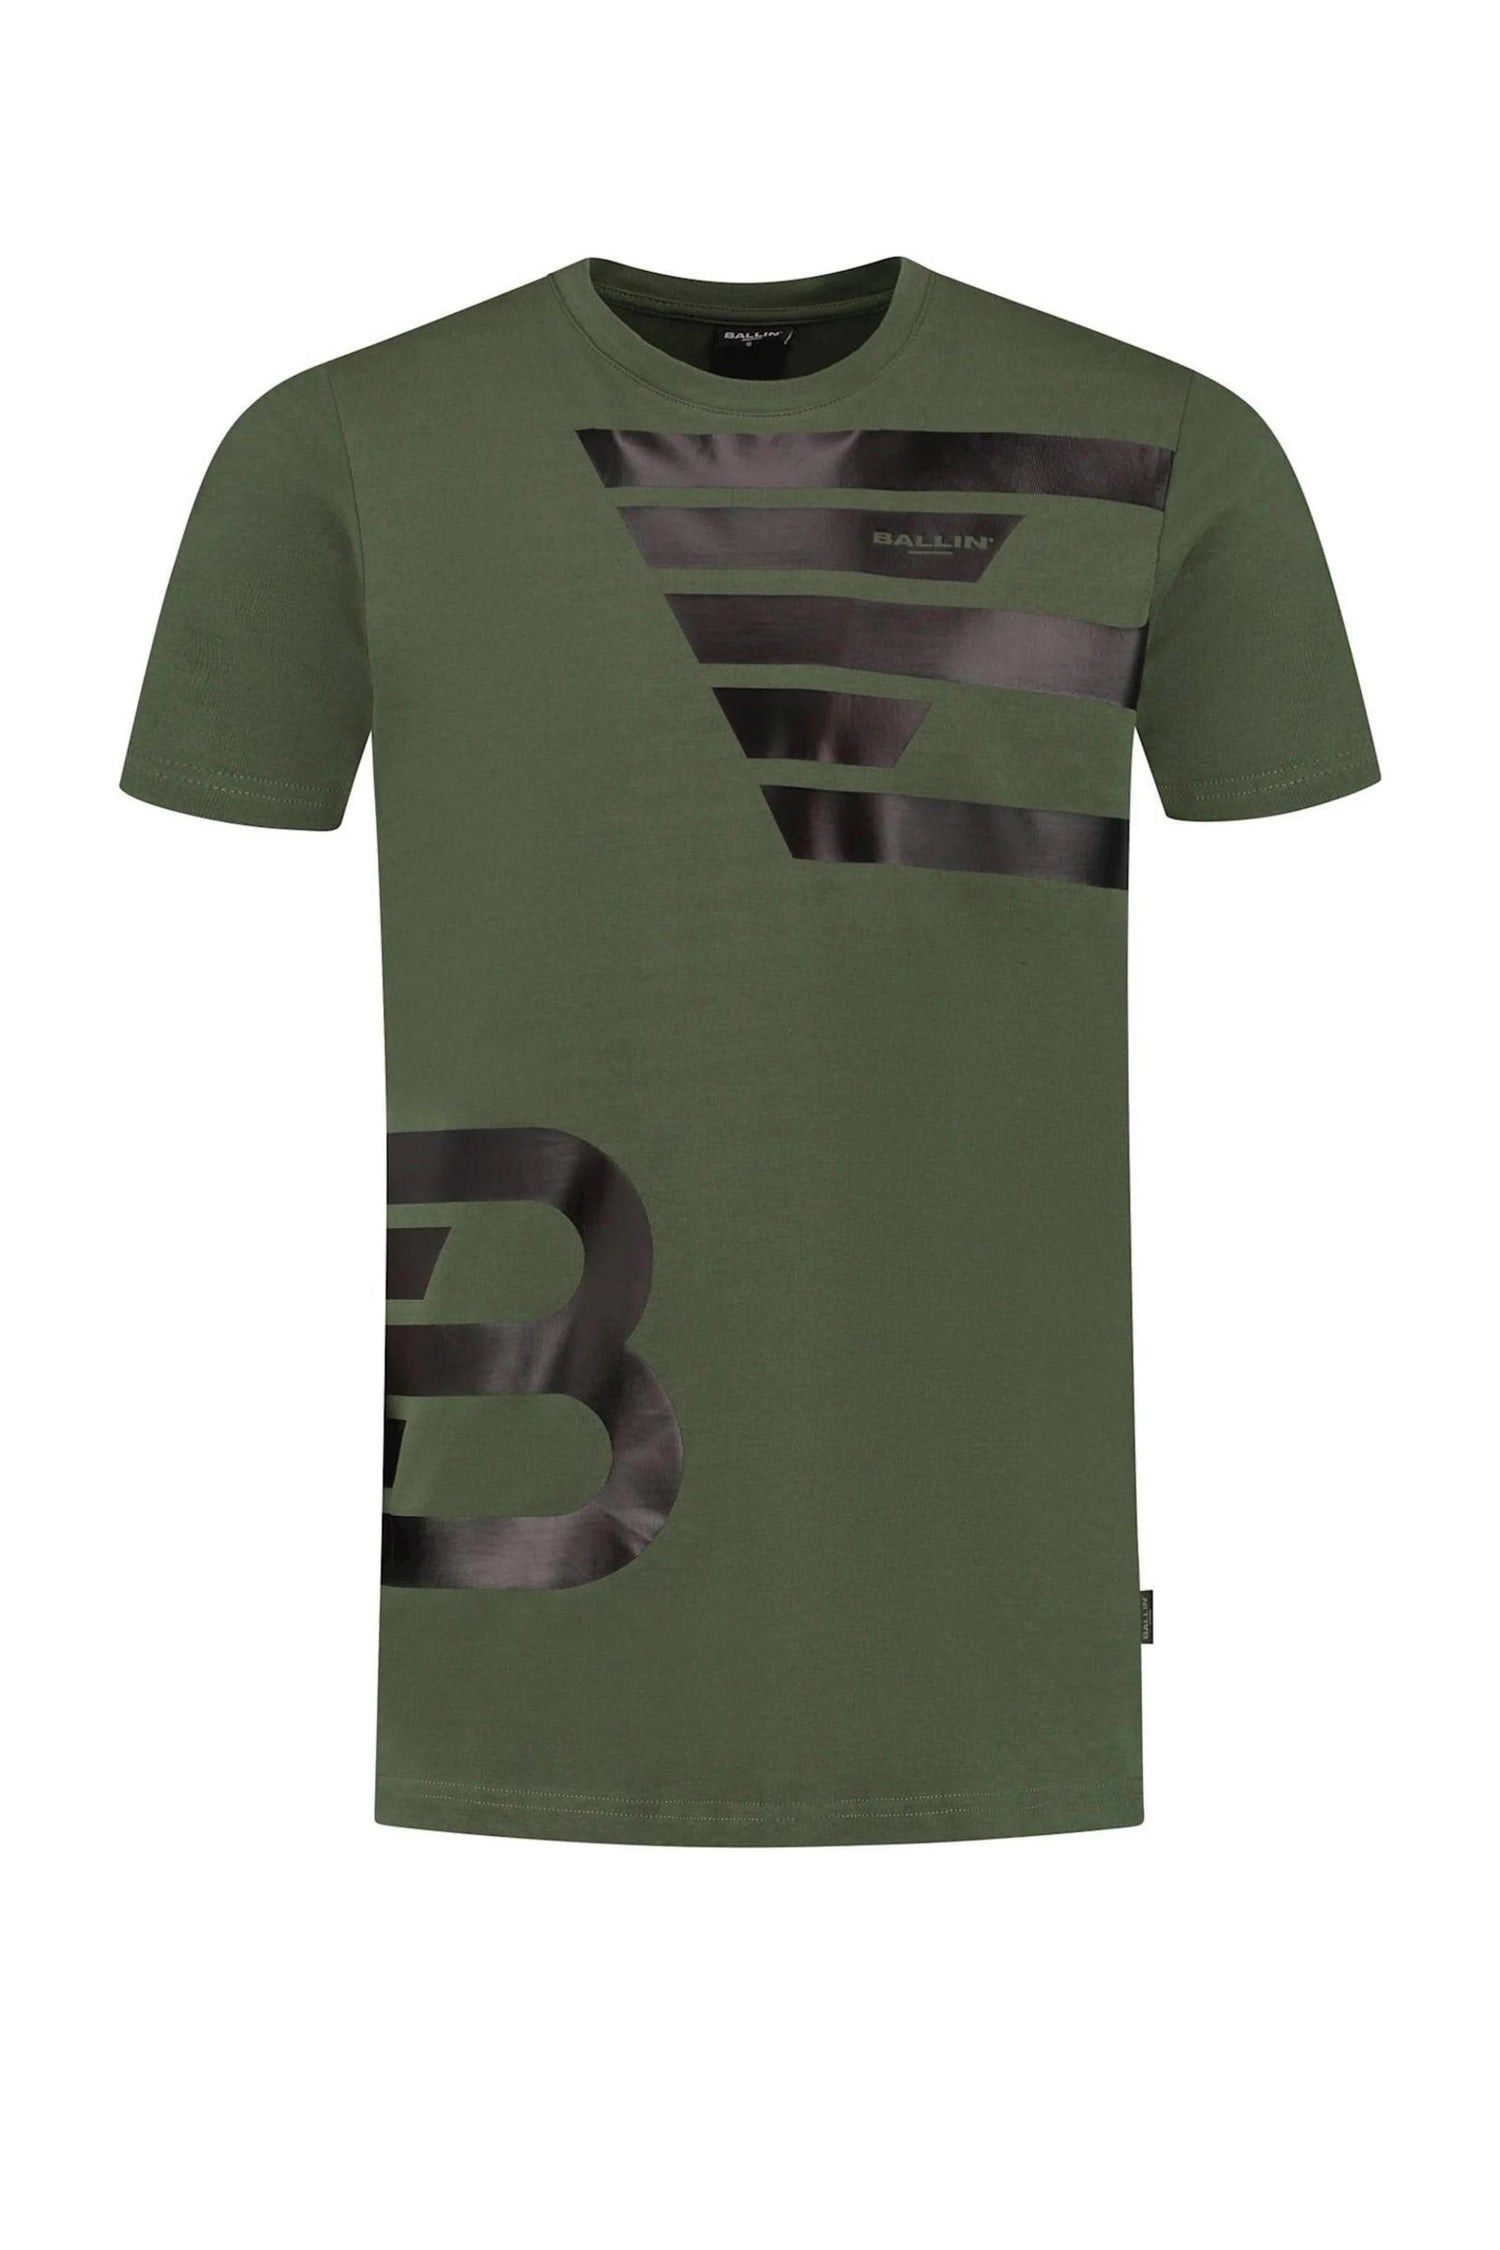 T-SHIRT WITH FRONTPRINT in forest green